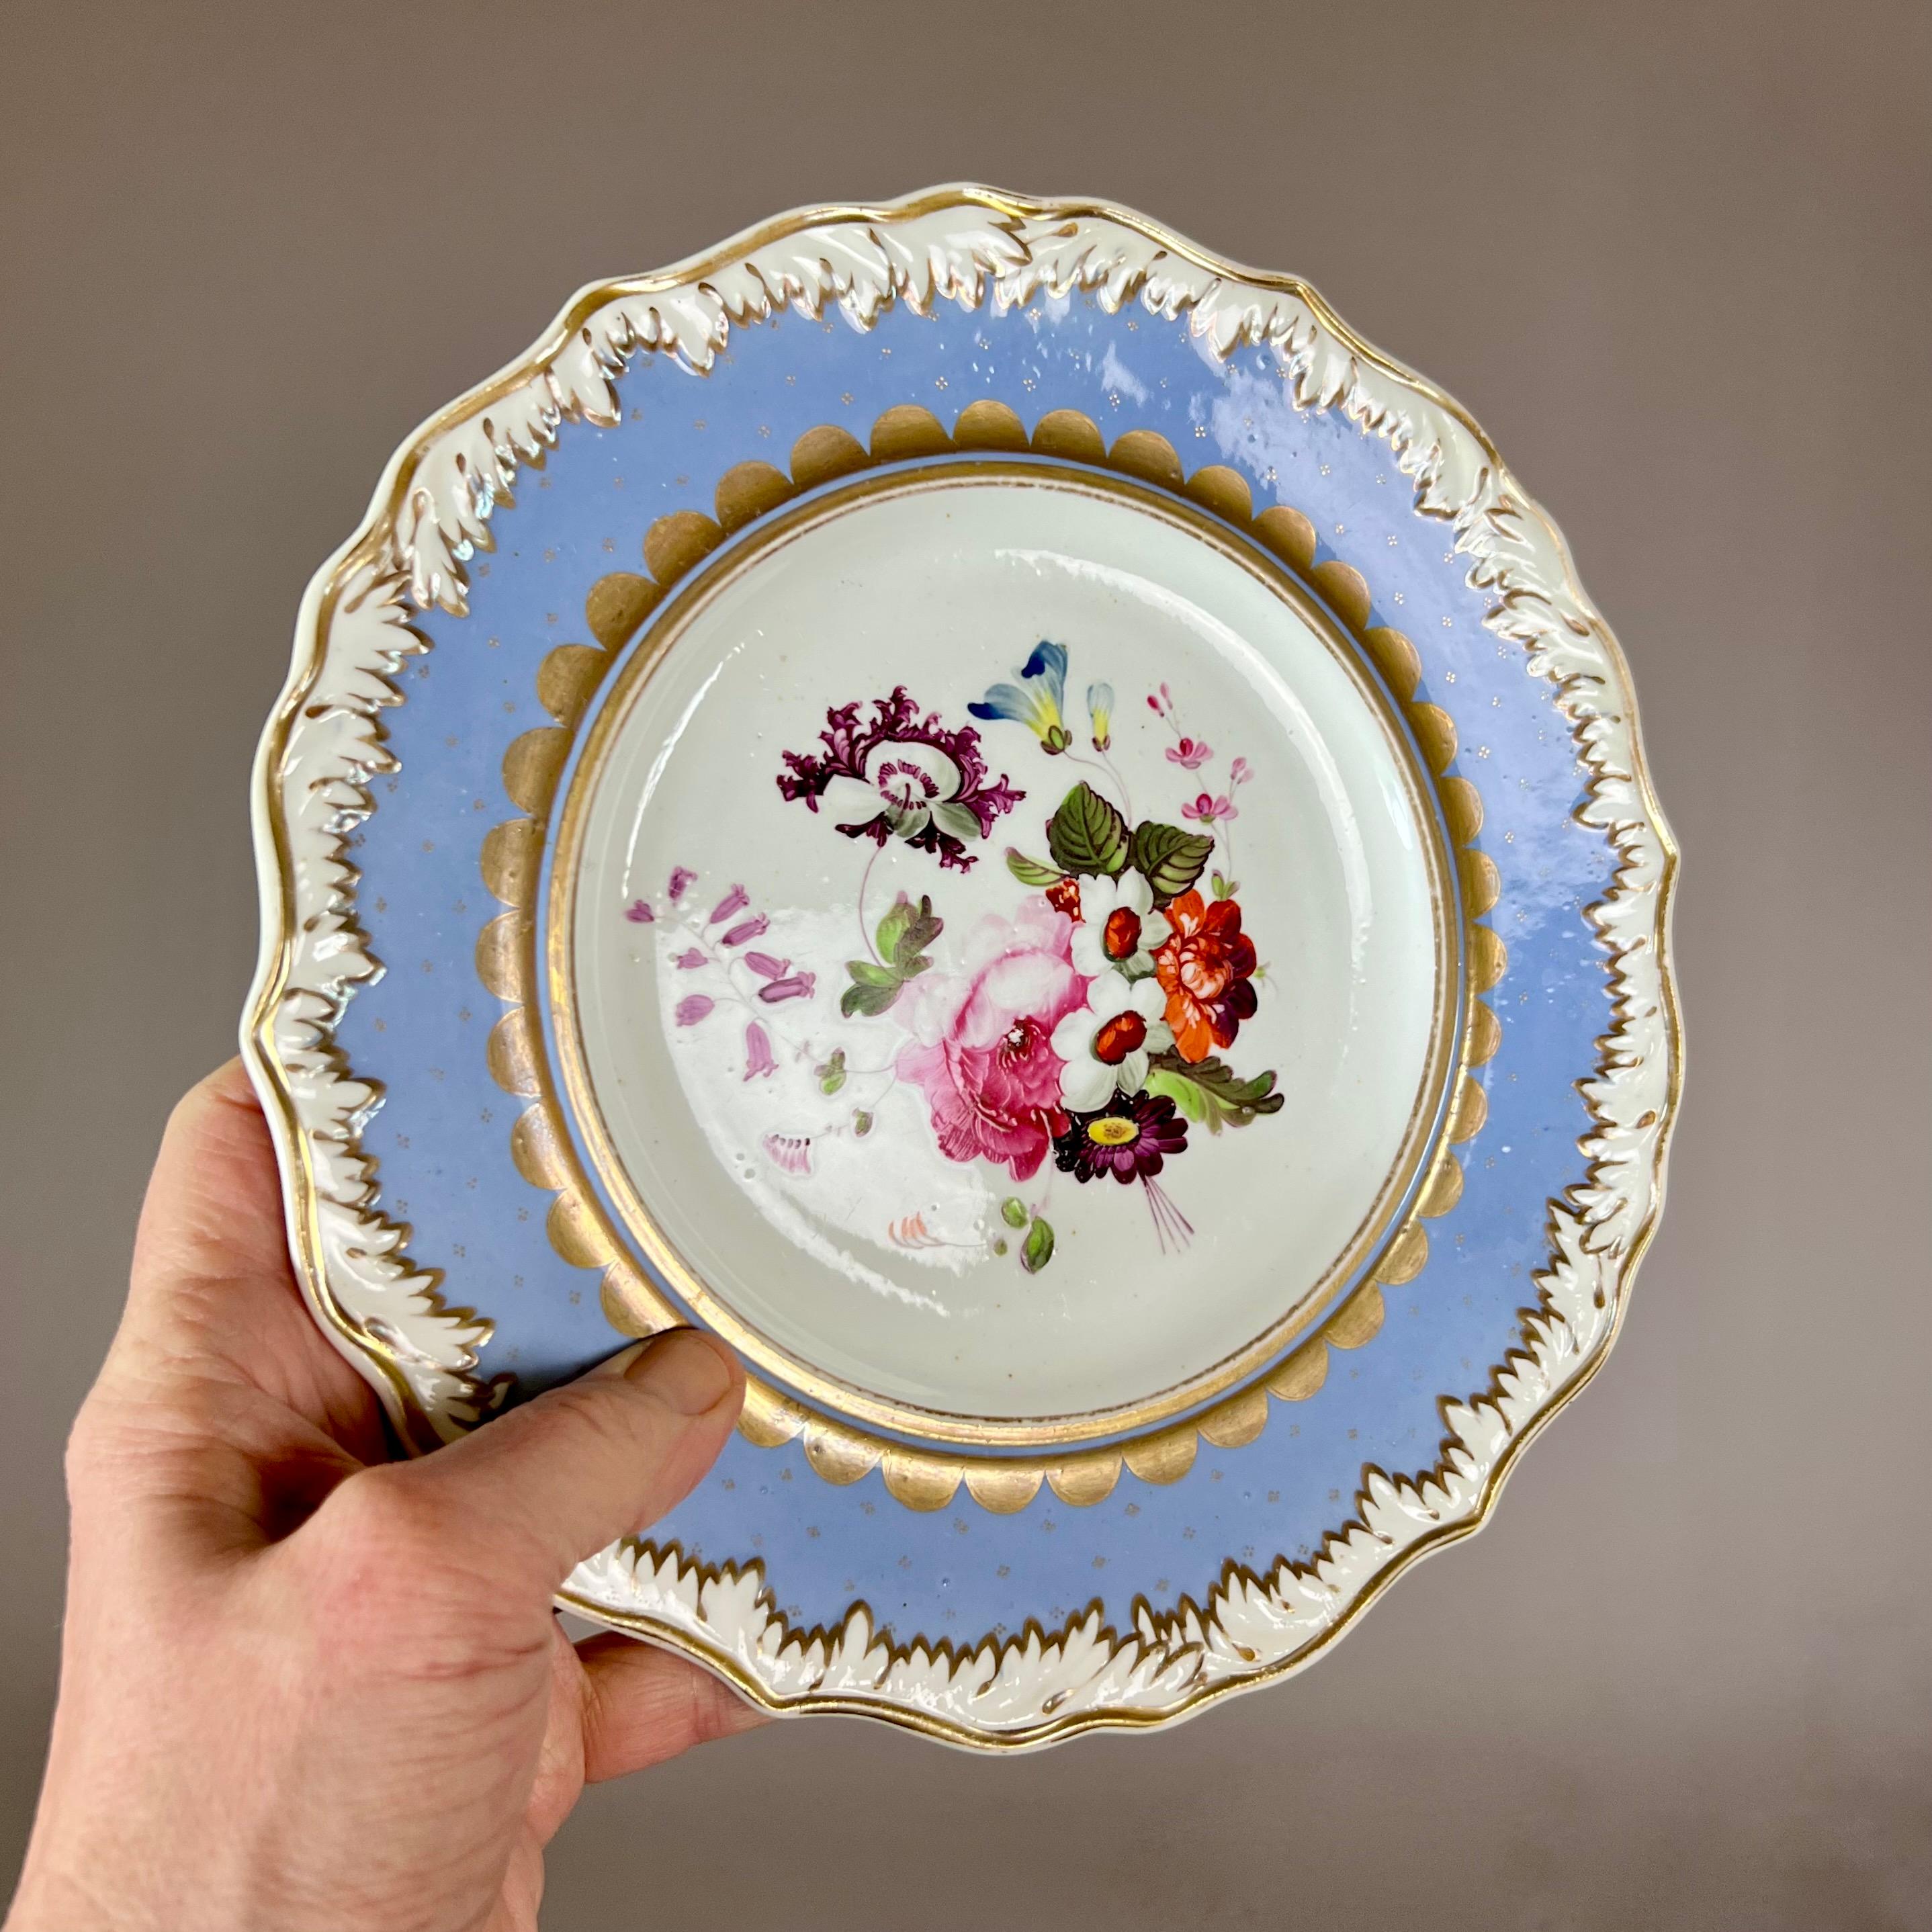 A plate with white melted snow border on a periwinkle ground with tiny gilt stars, with a beautifully painted flower bouquet in the centre

There are several other items available in near-identical style, see separate listings.

Pattern